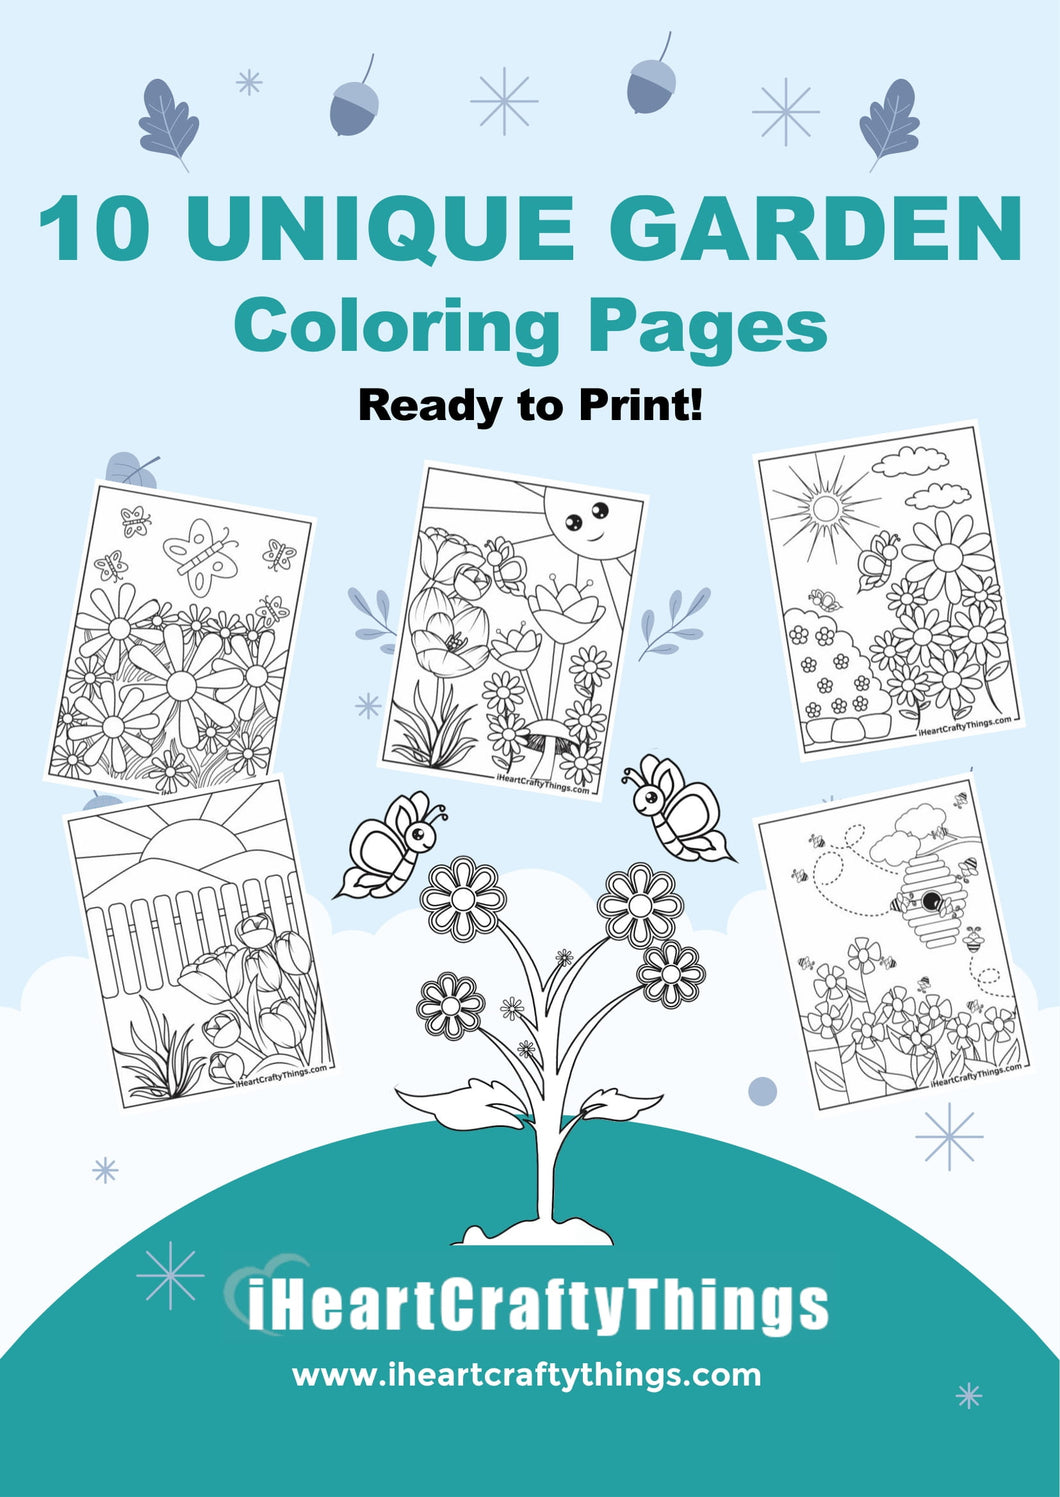 10 GARDEN COLORING PAGES